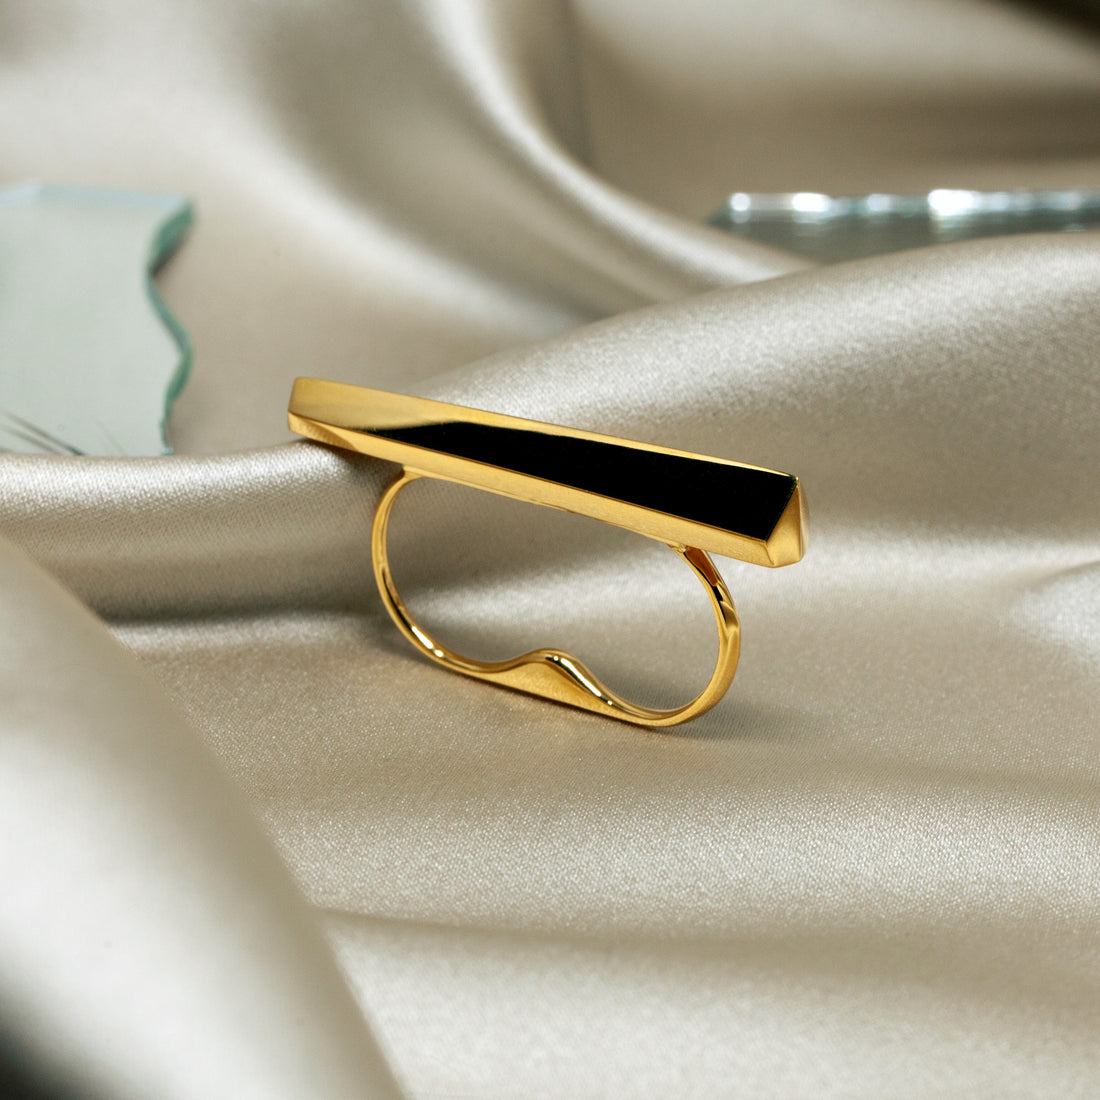 Bena Jewelry Edgy Collection Vermeil Gold Ring Handmade Local Montreal Designer Ethical Jewelry Little Italy Jeweler Vermeil Gold Silver Yellow Gold Plated Statement Ring